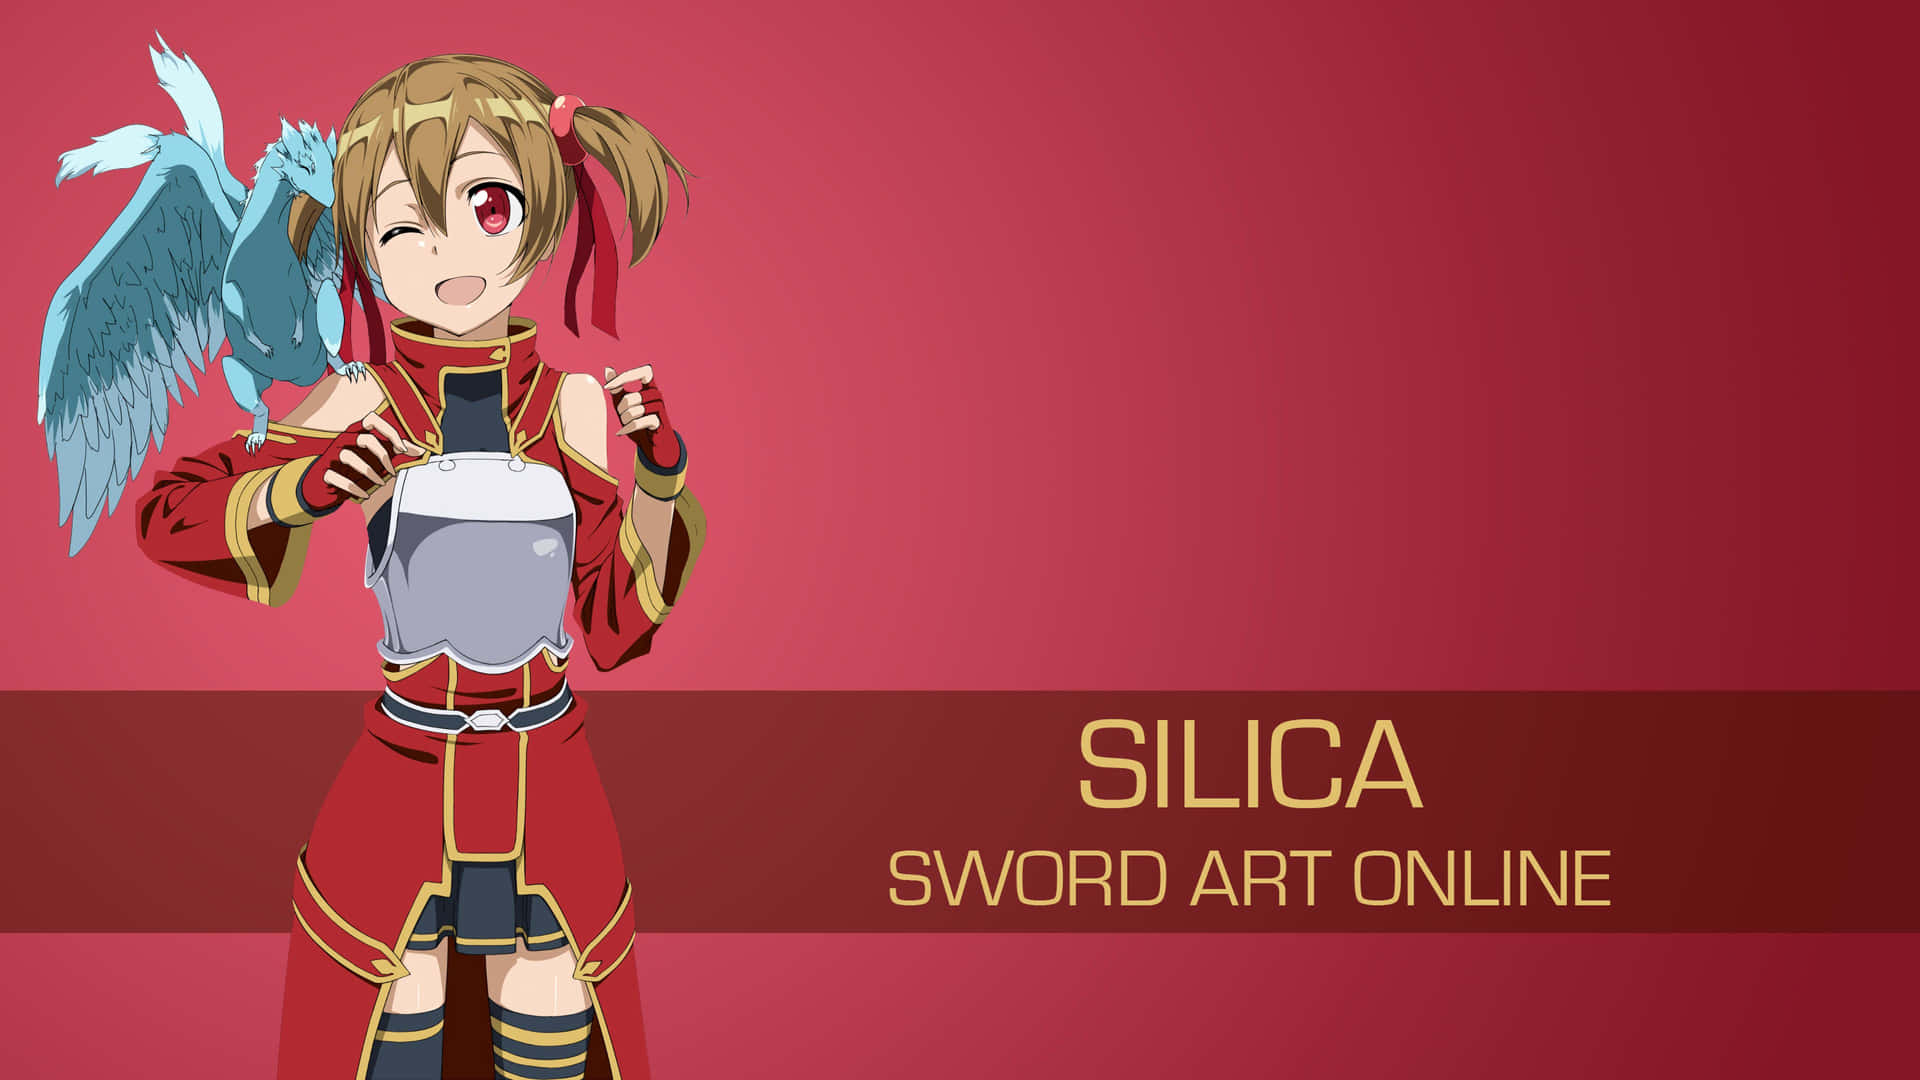 Silica and Pina from Sword Art Online in a Beautiful Forest Wallpaper